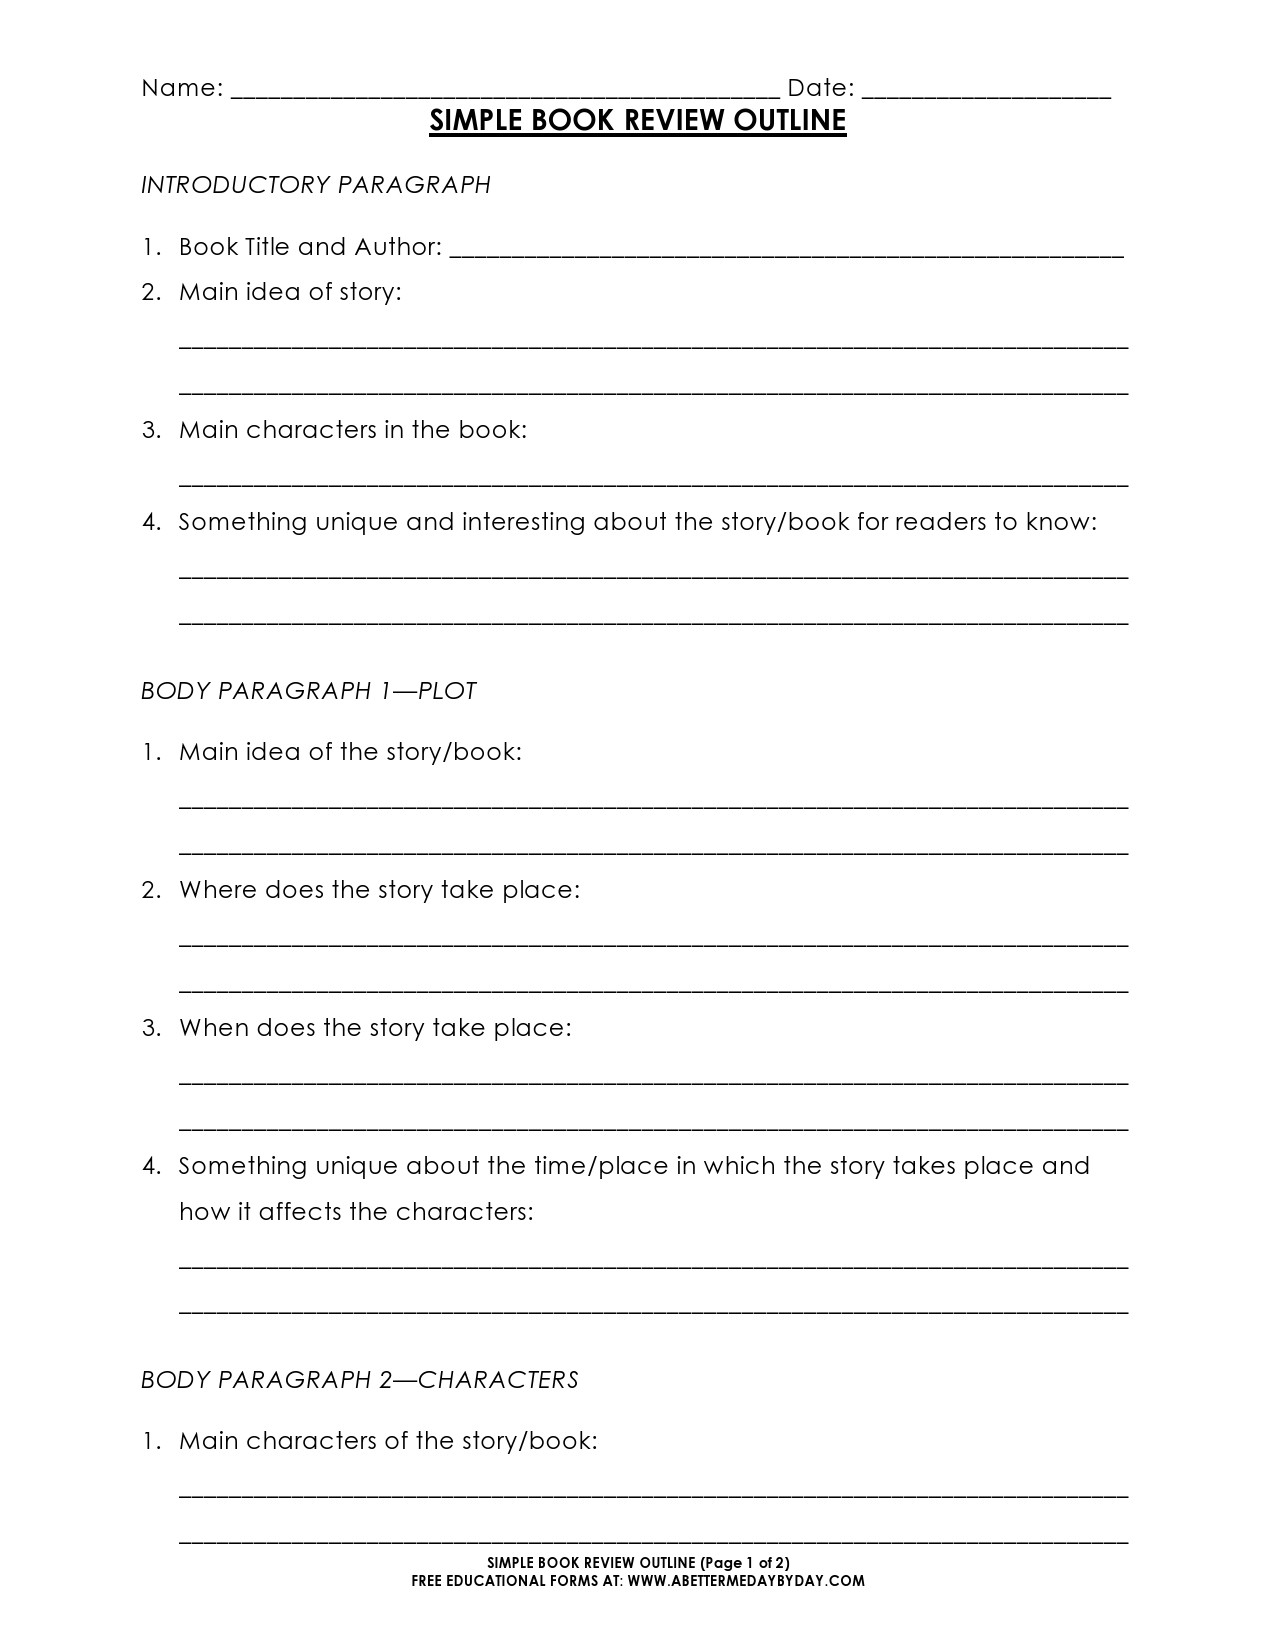 Free book review template 12